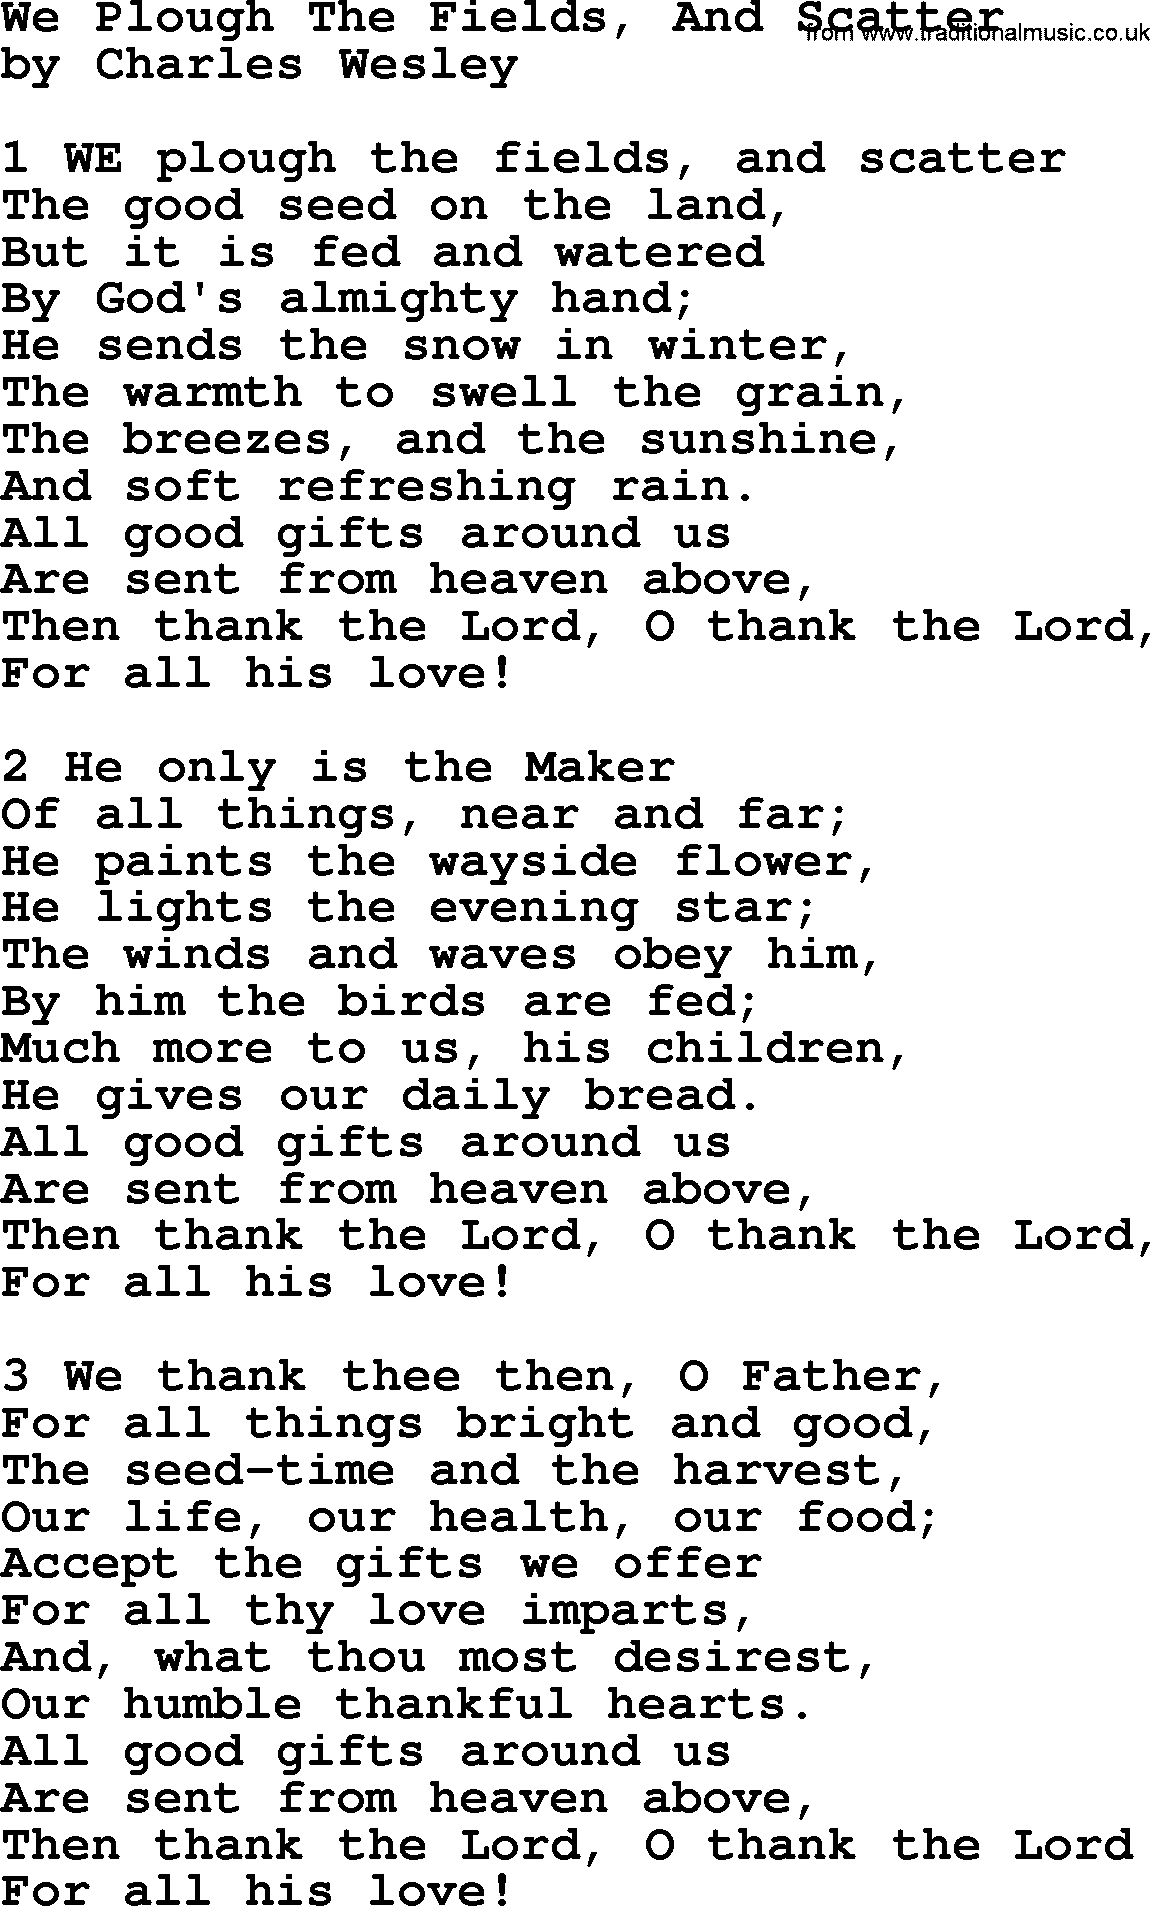 Charles Wesley hymn: We Plough The Fields, And Scatter, lyrics